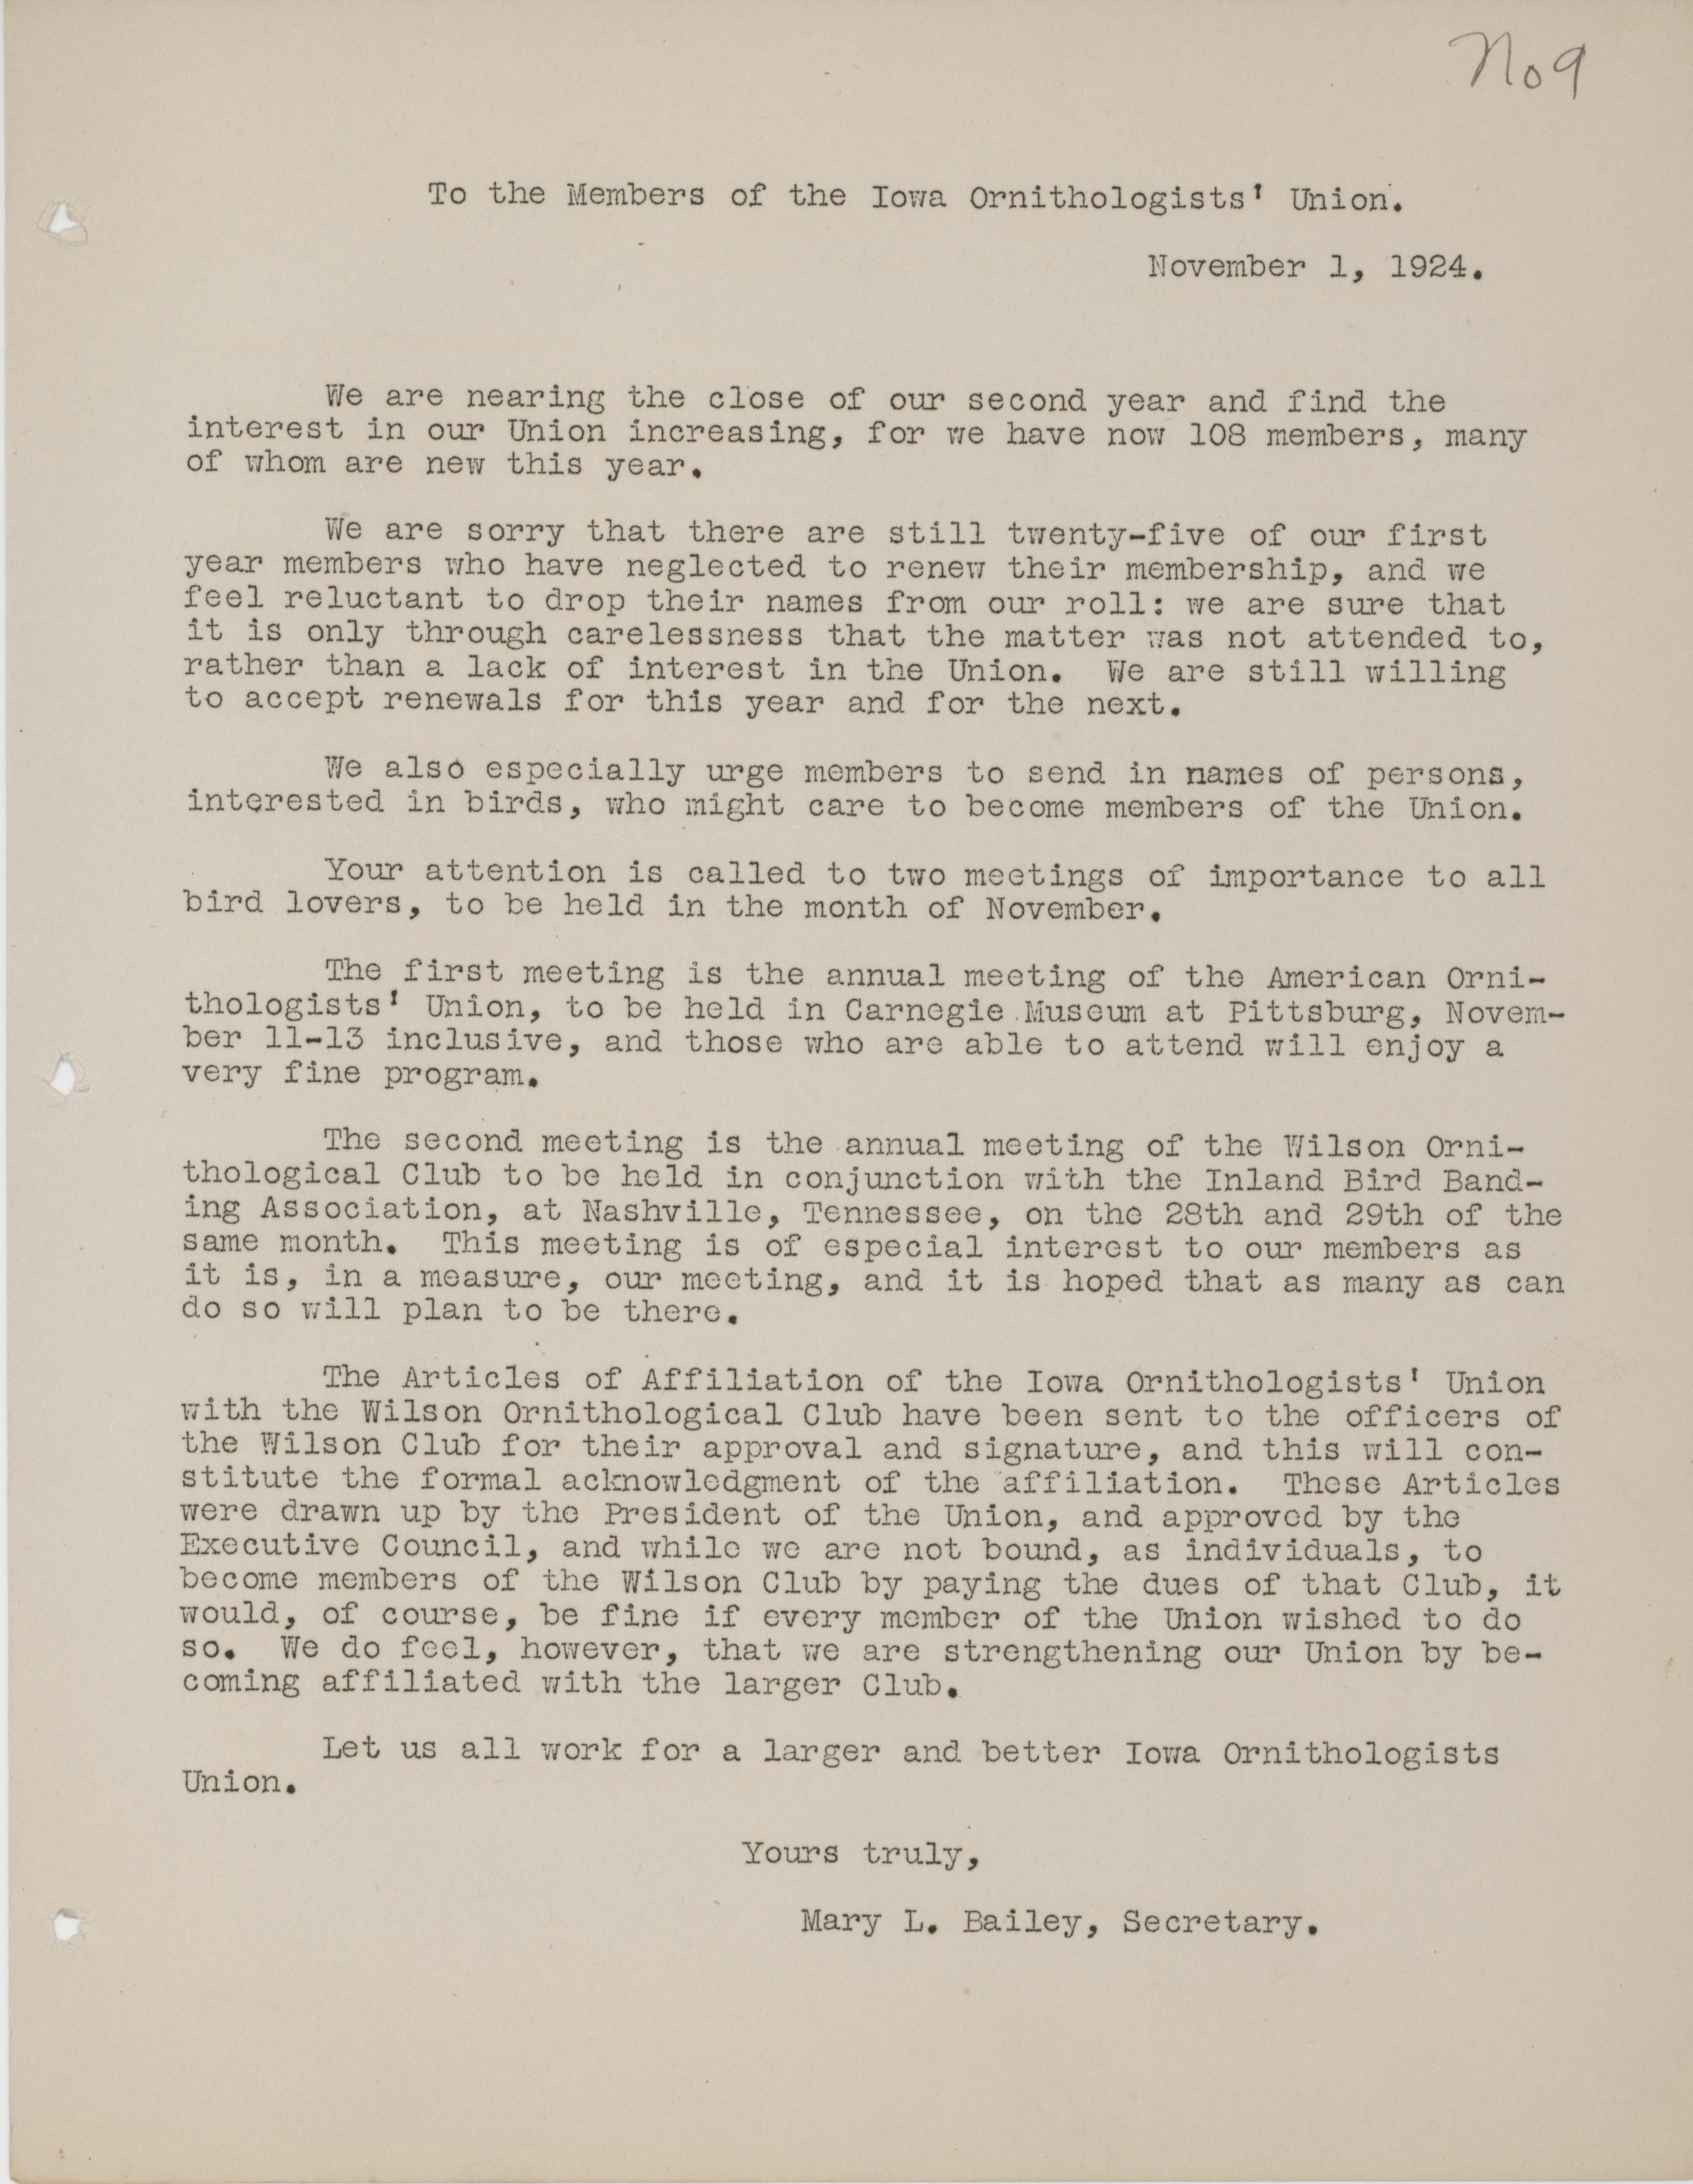 Letter to the members of the Iowa Ornithologists' Union, November, 1, 1924